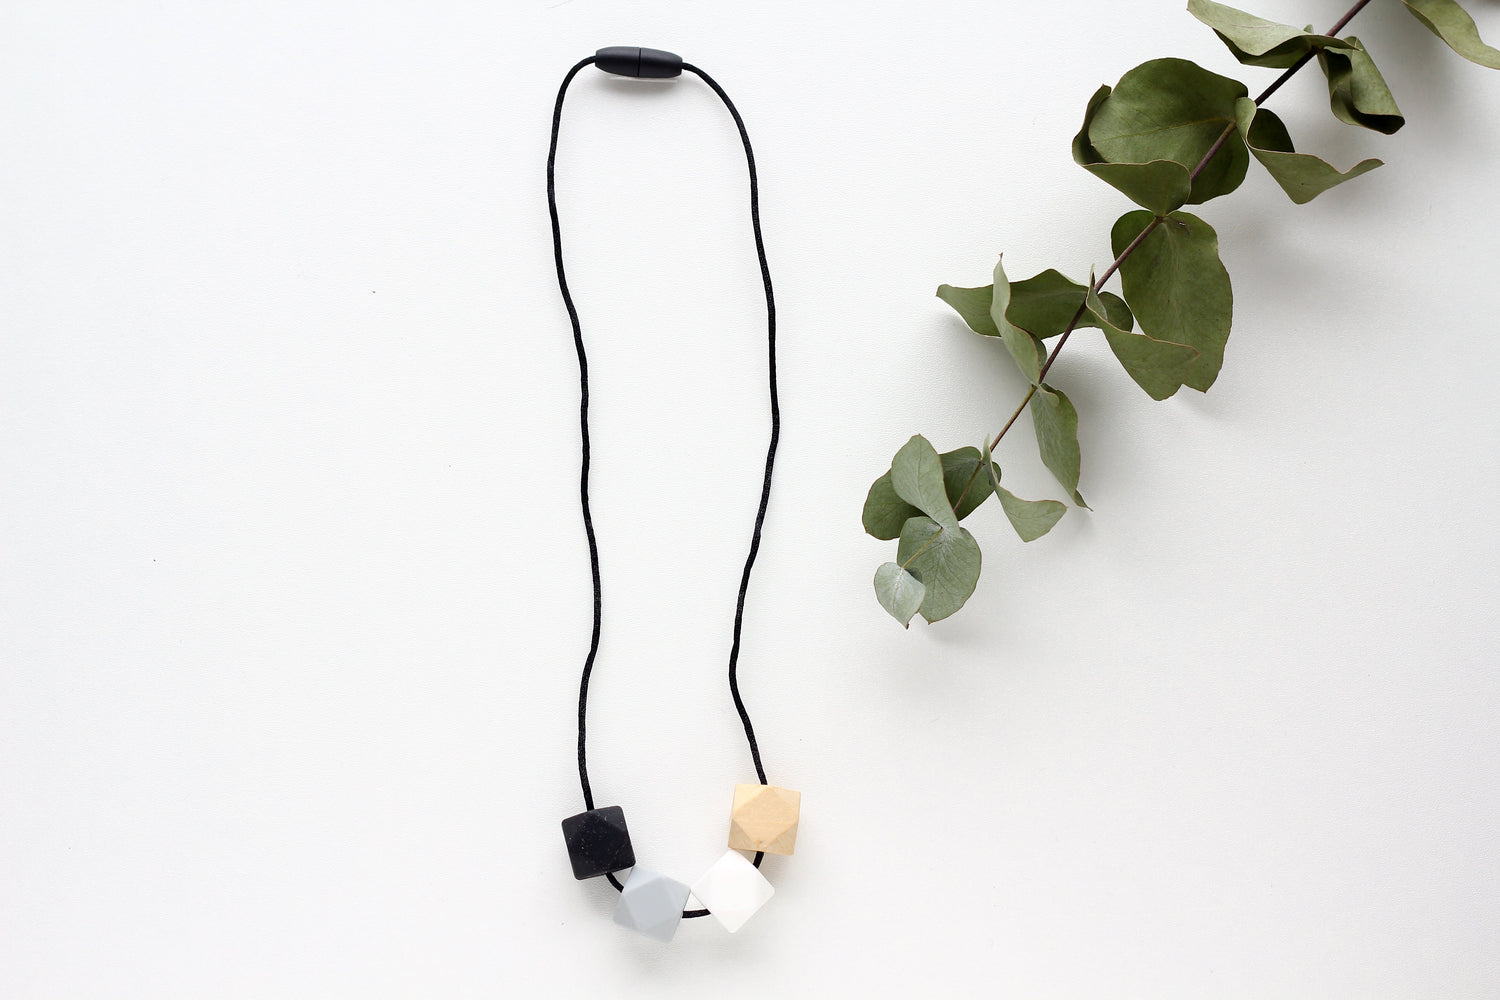 Mint - Nursing Necklace natural wood & silicone!.